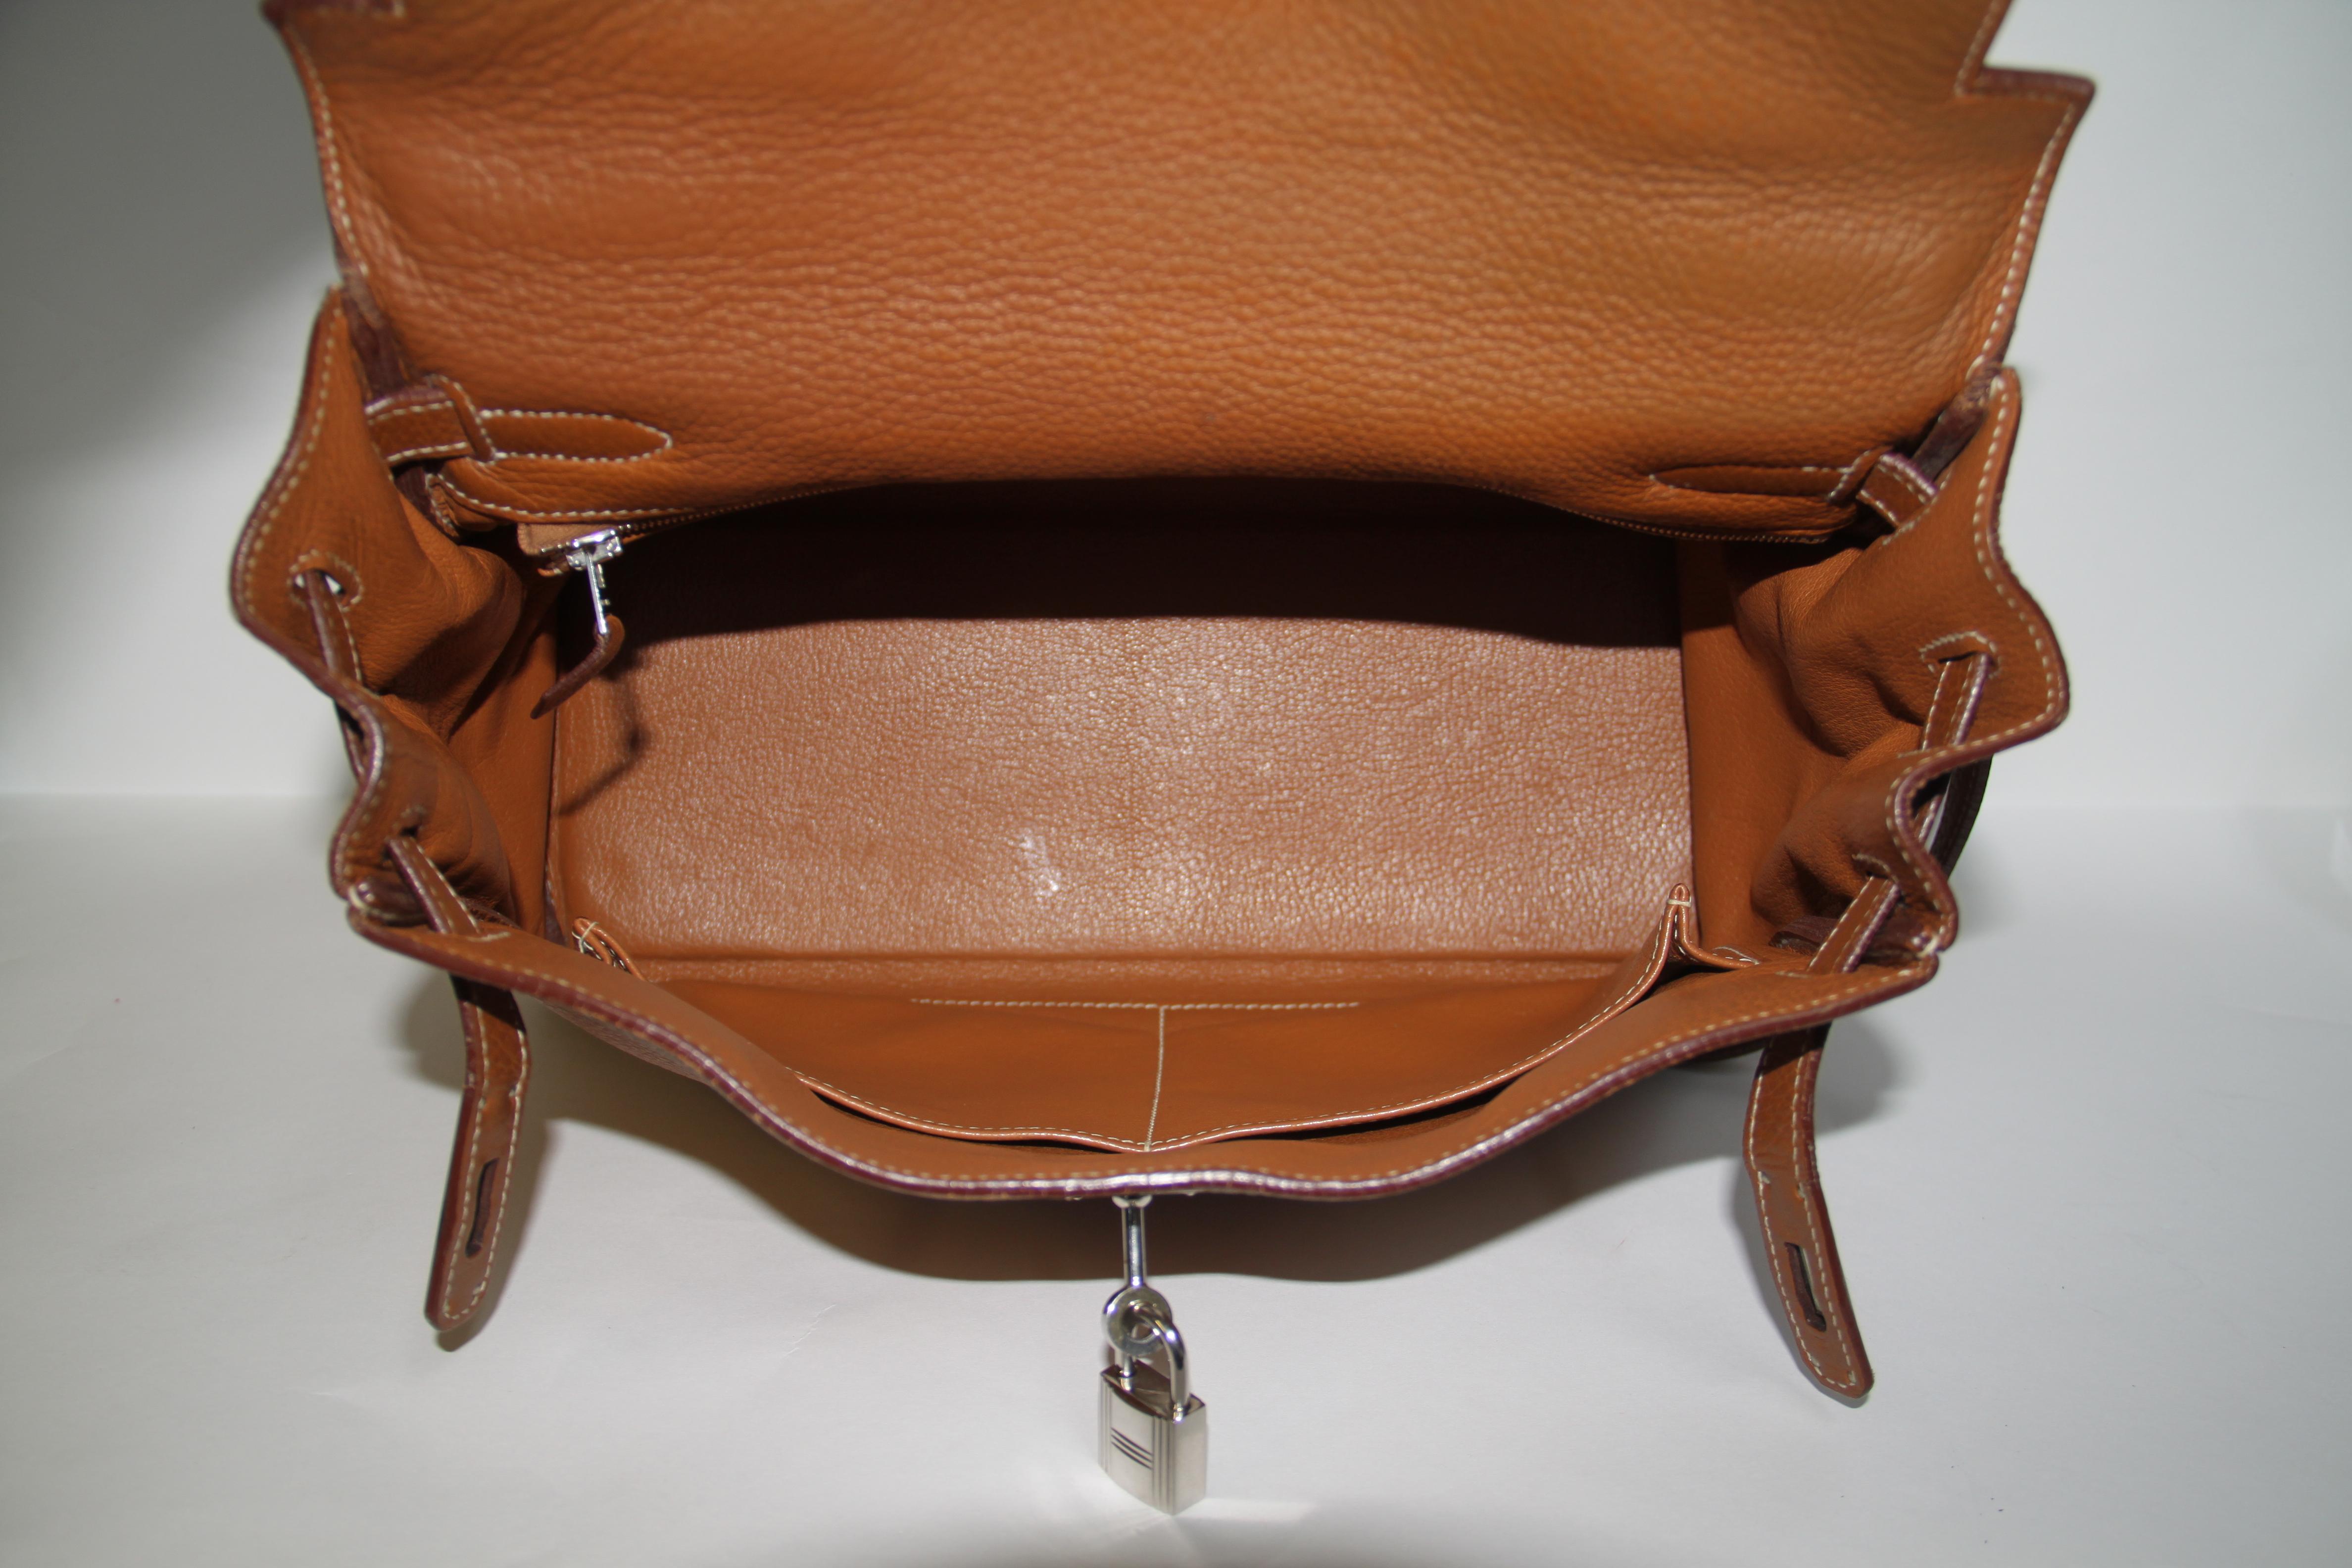 Hermes Kelly 32 Bag brown leather epsom/tan with silver Hardware Tote/Crossbody For Sale 7